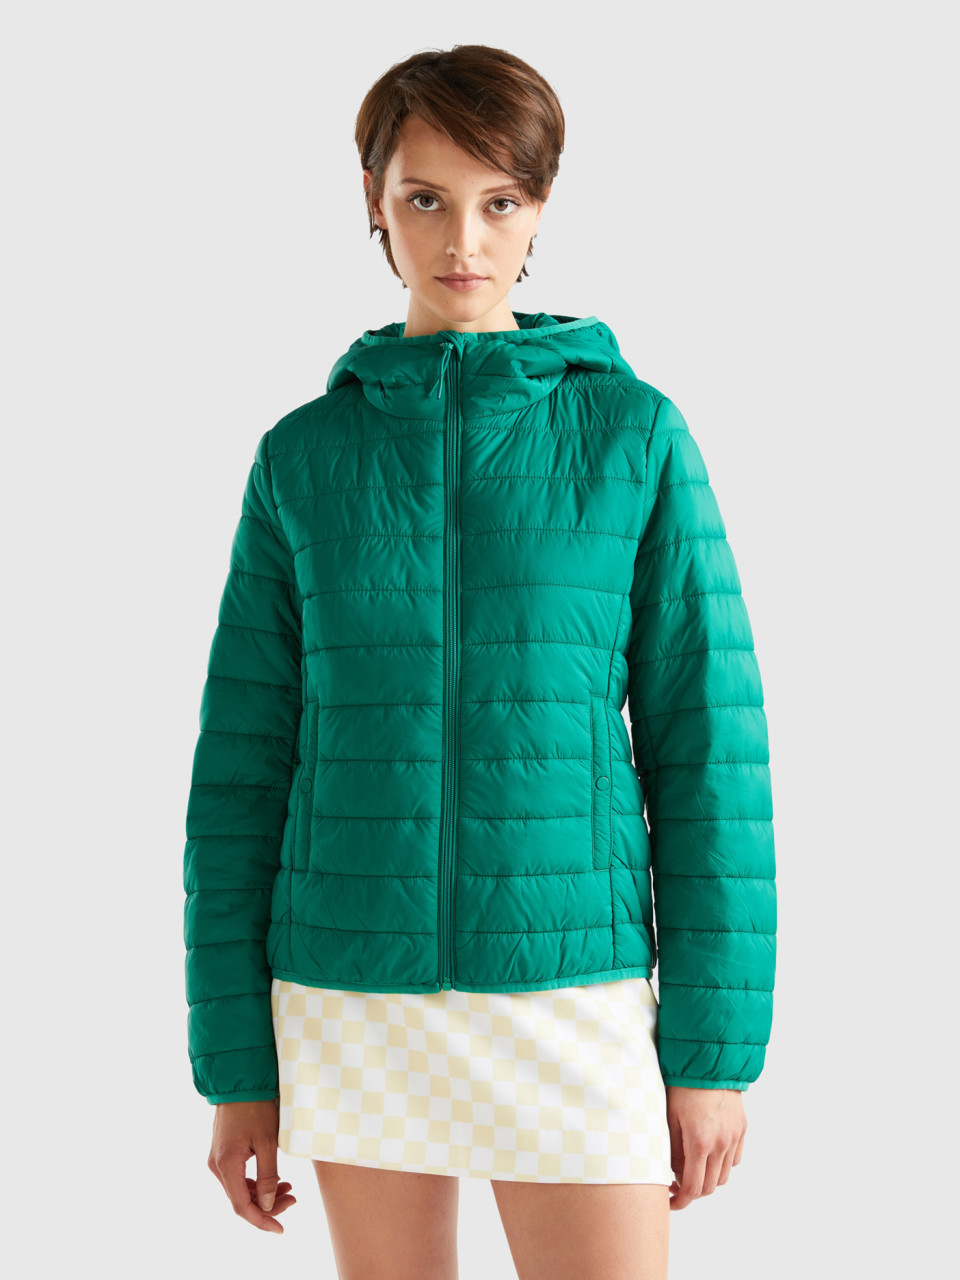 Benetton, Puffer Jacket With Recycled Wadding, Green, Women